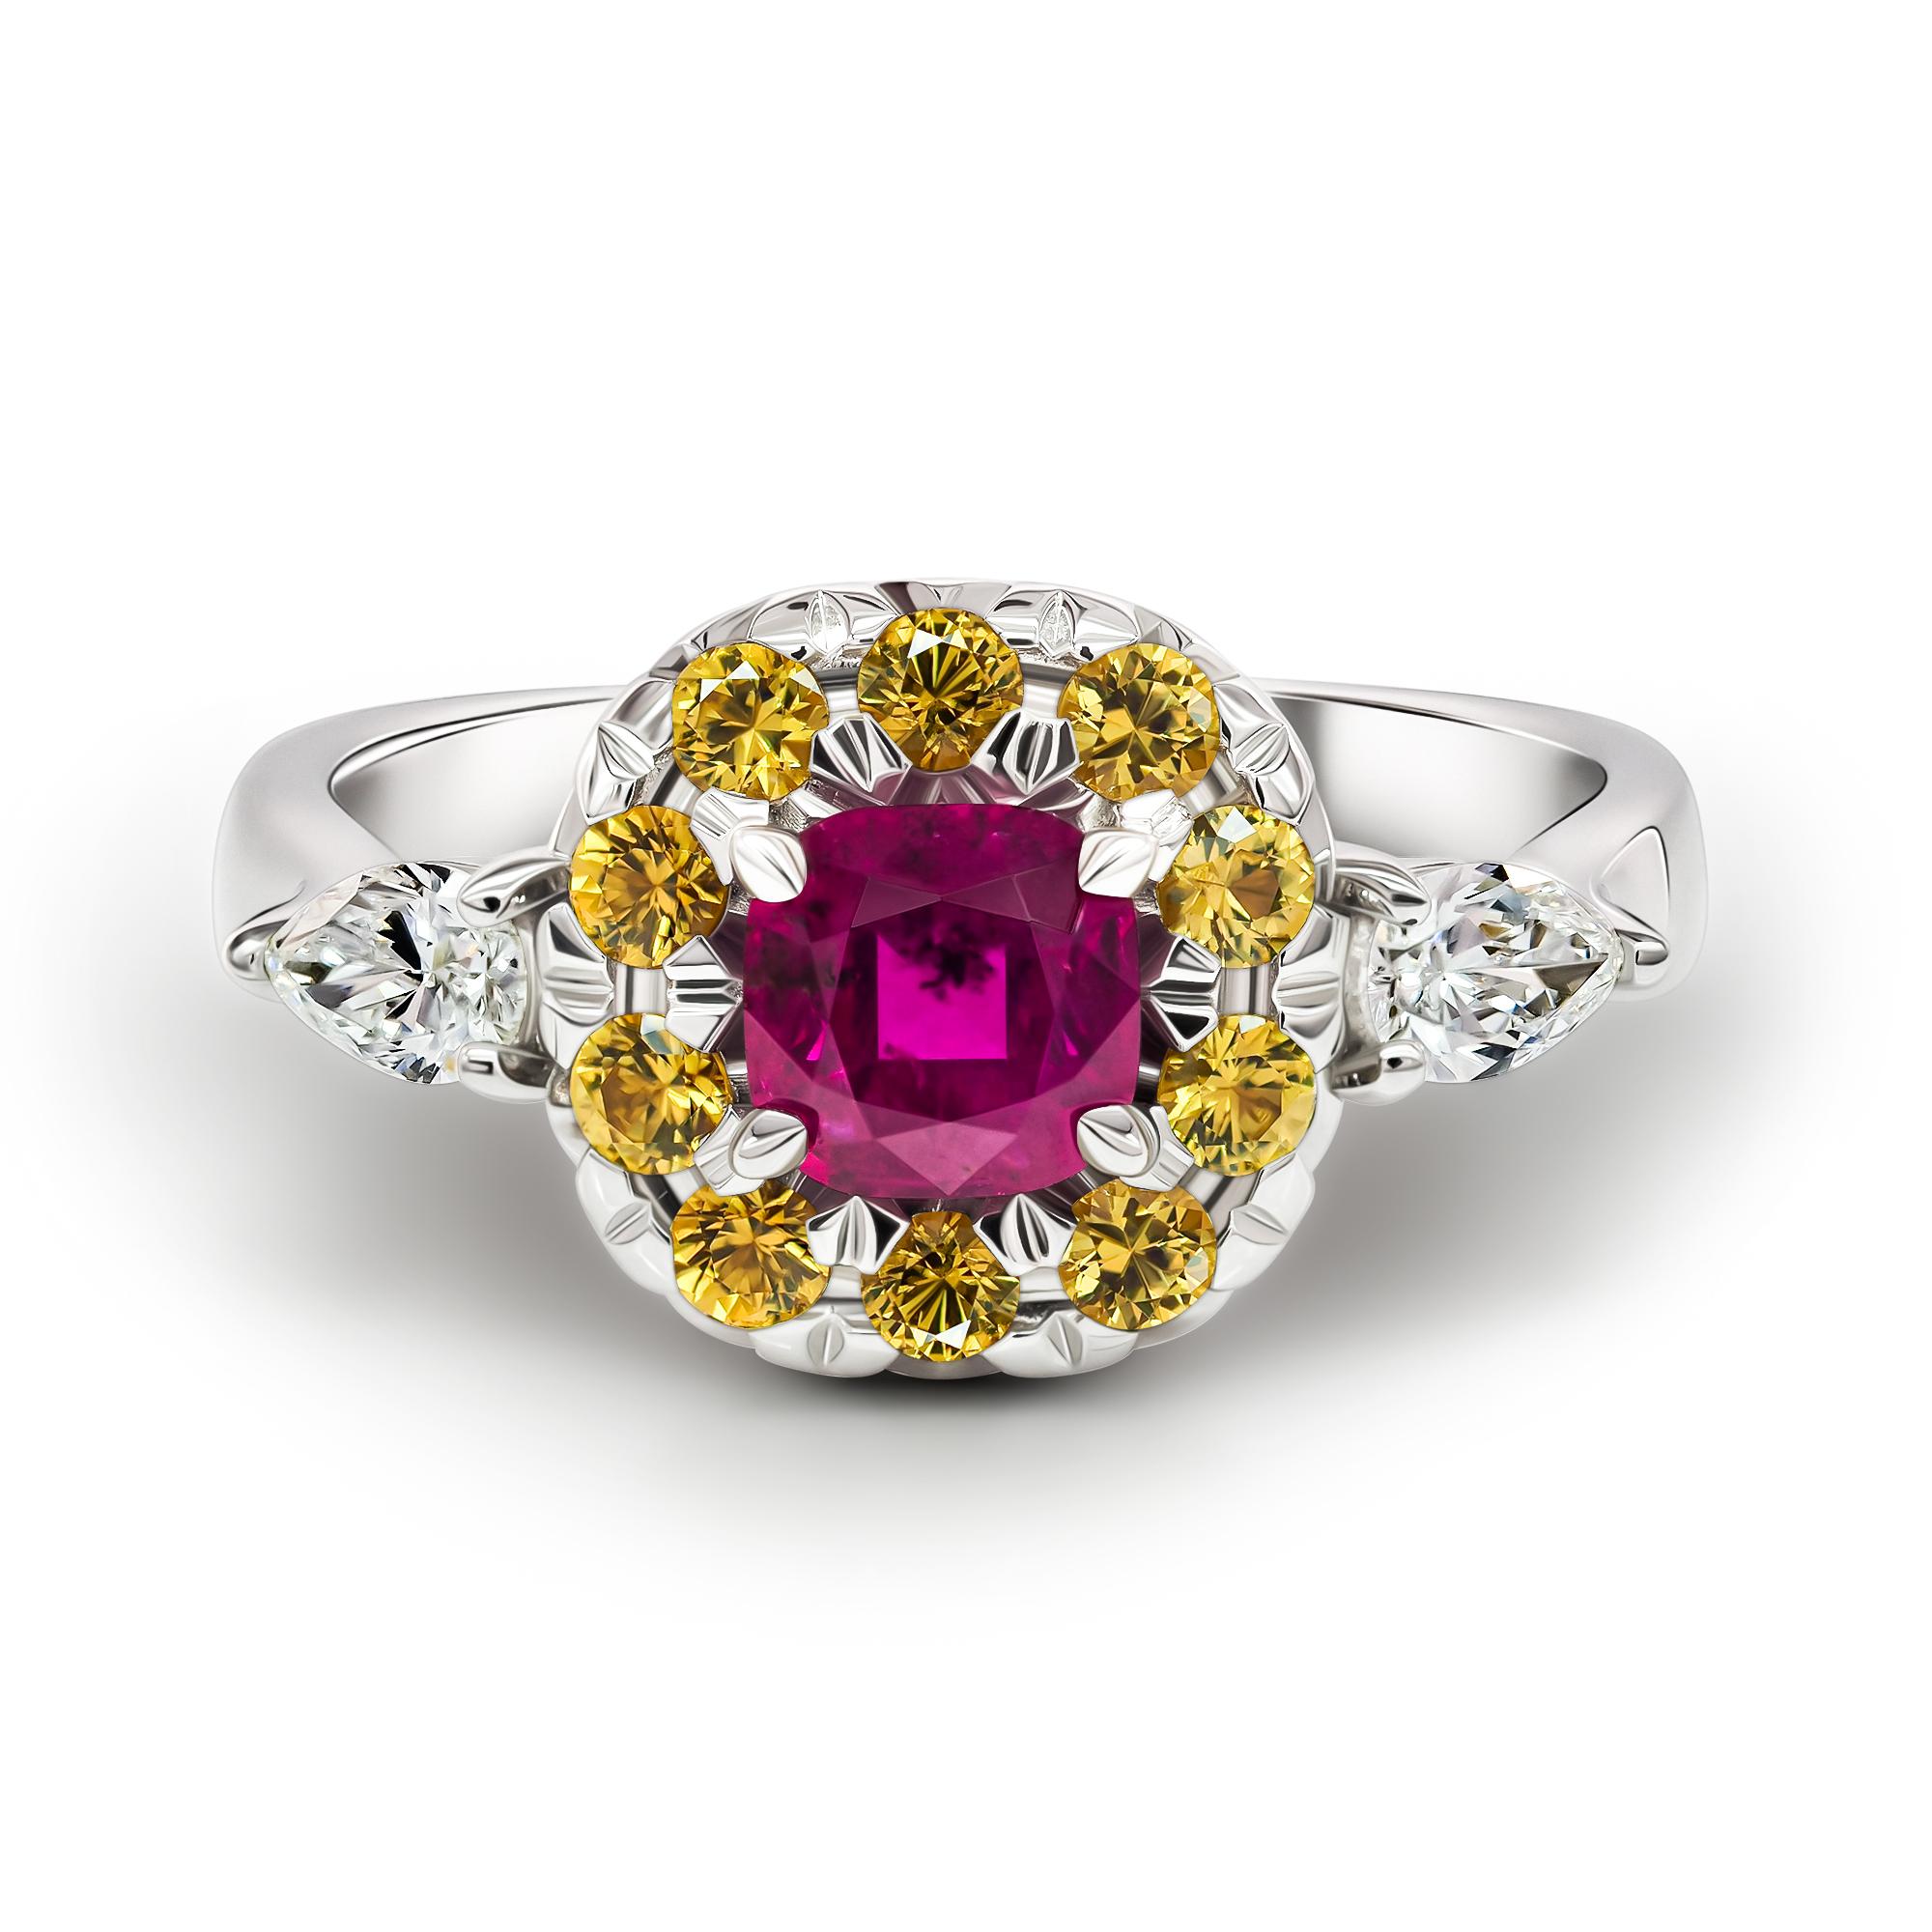 •	18 k white gold. 
•	Unheated Ruby in cushion cut – total carat weight 0.9.
•	Unheated sapphire in round cut   – total carat weight 0.56.
•	Product weight – 6.15 grams. 
•	Ring size – 7’ 